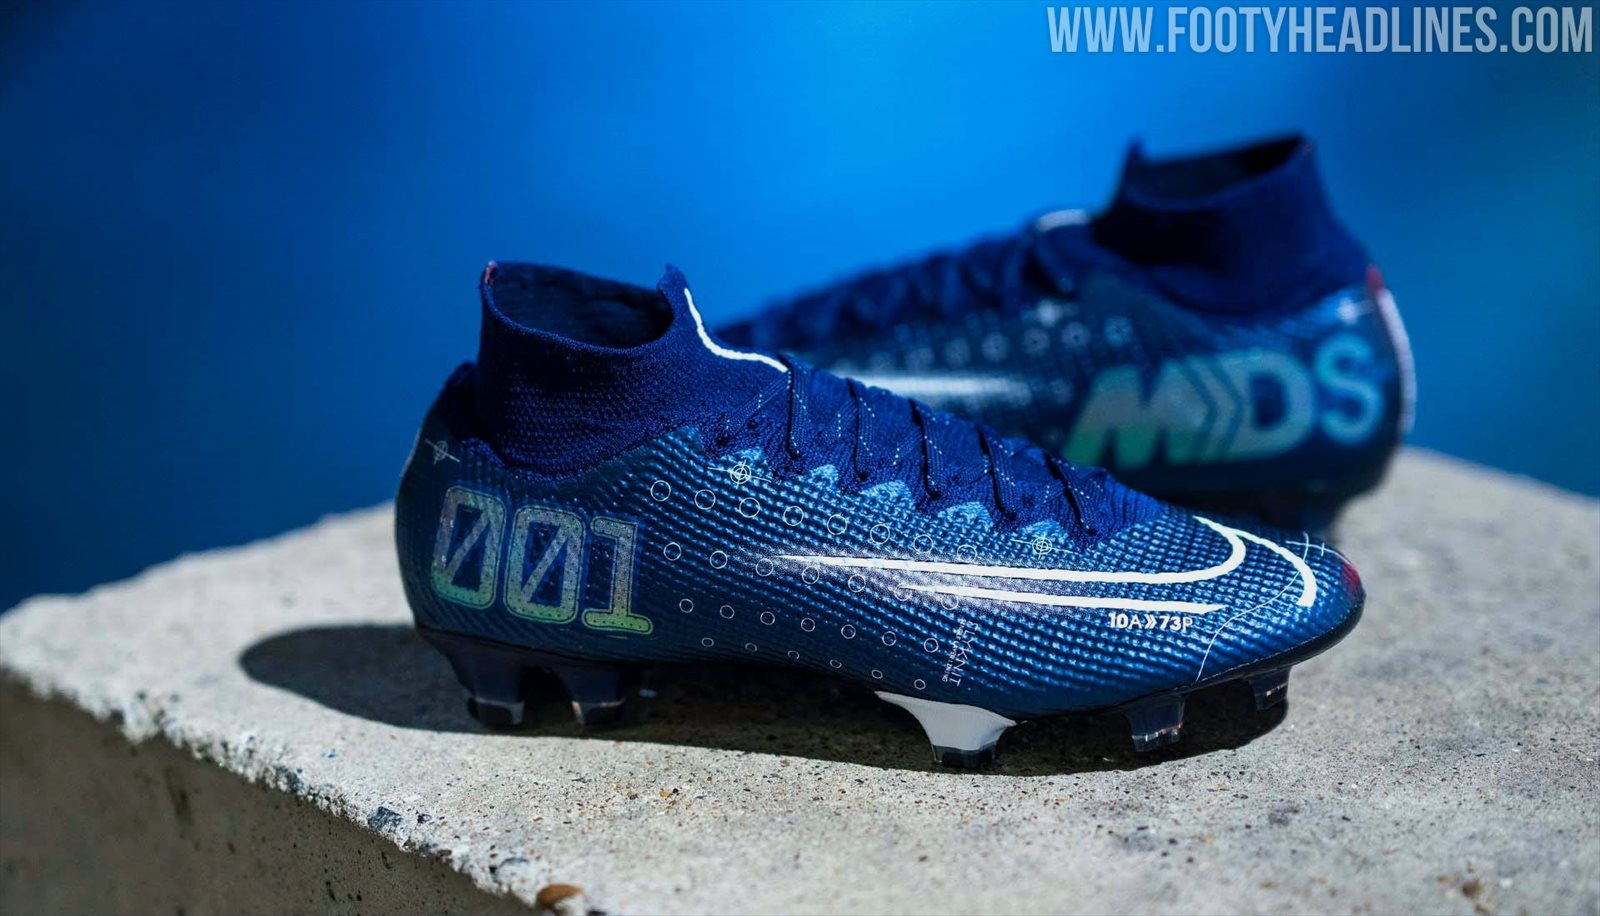 Mercurial Dream Speed 2 Boots Revealed - CR7 & Mbappé - Footy Headlines